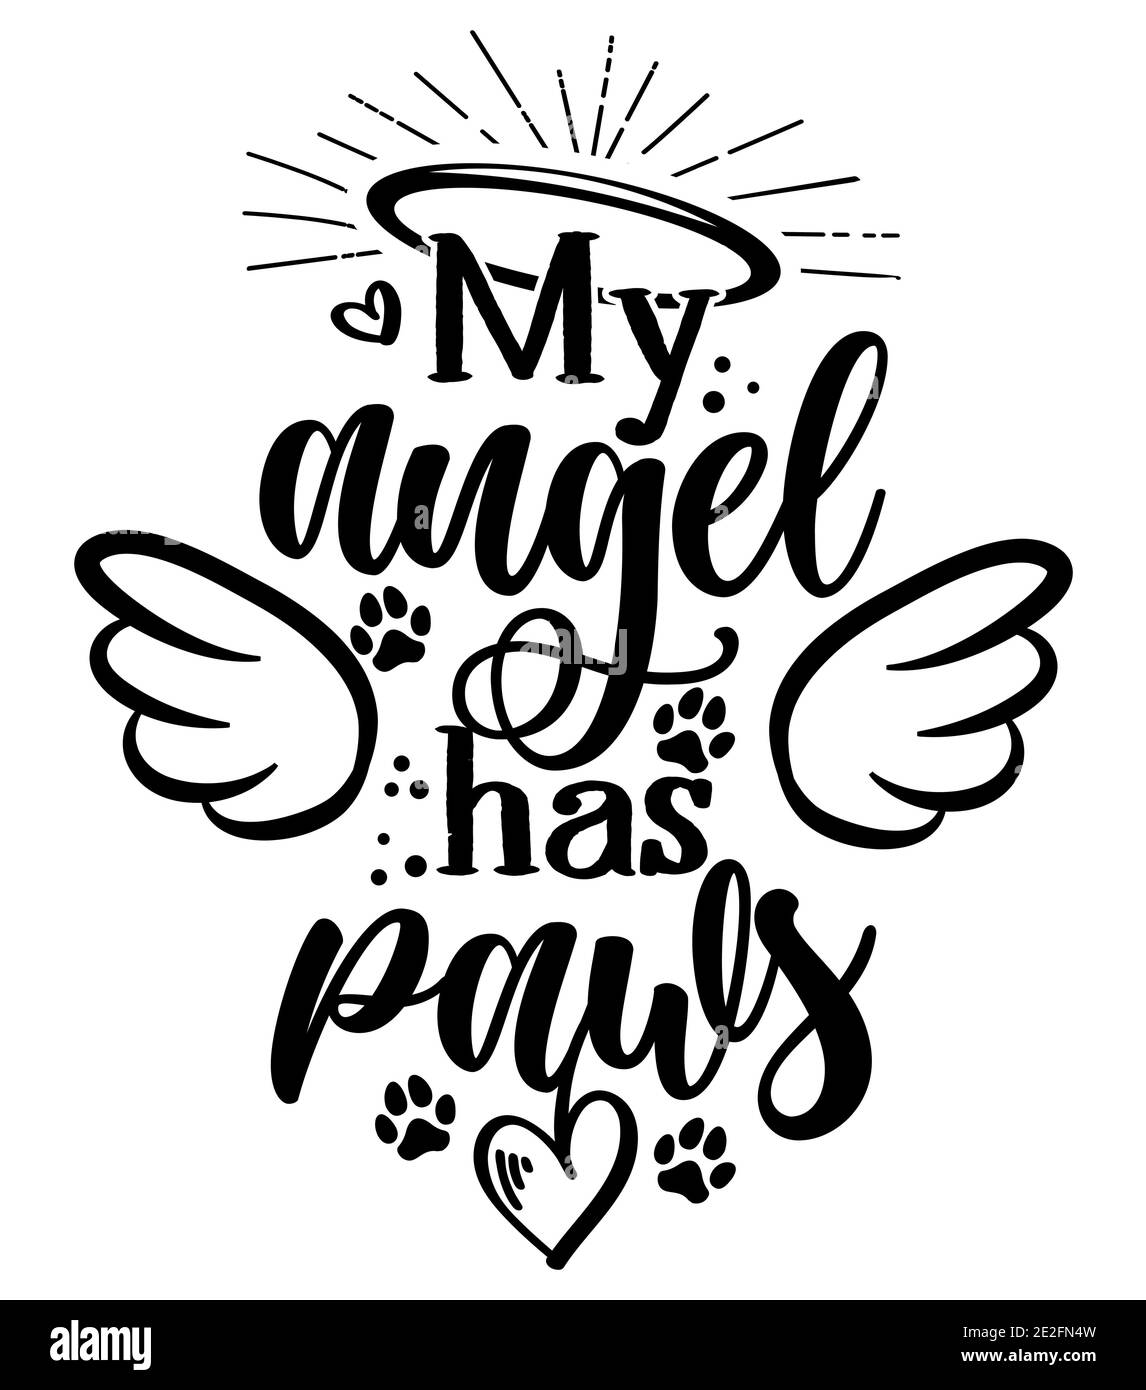 My angel has paws - Hand drawn positive memory phrase. Modern brush calligraphy. Rest in peace, rip yor dog or cat. Love your dog. Inspirational typog Stock Vector